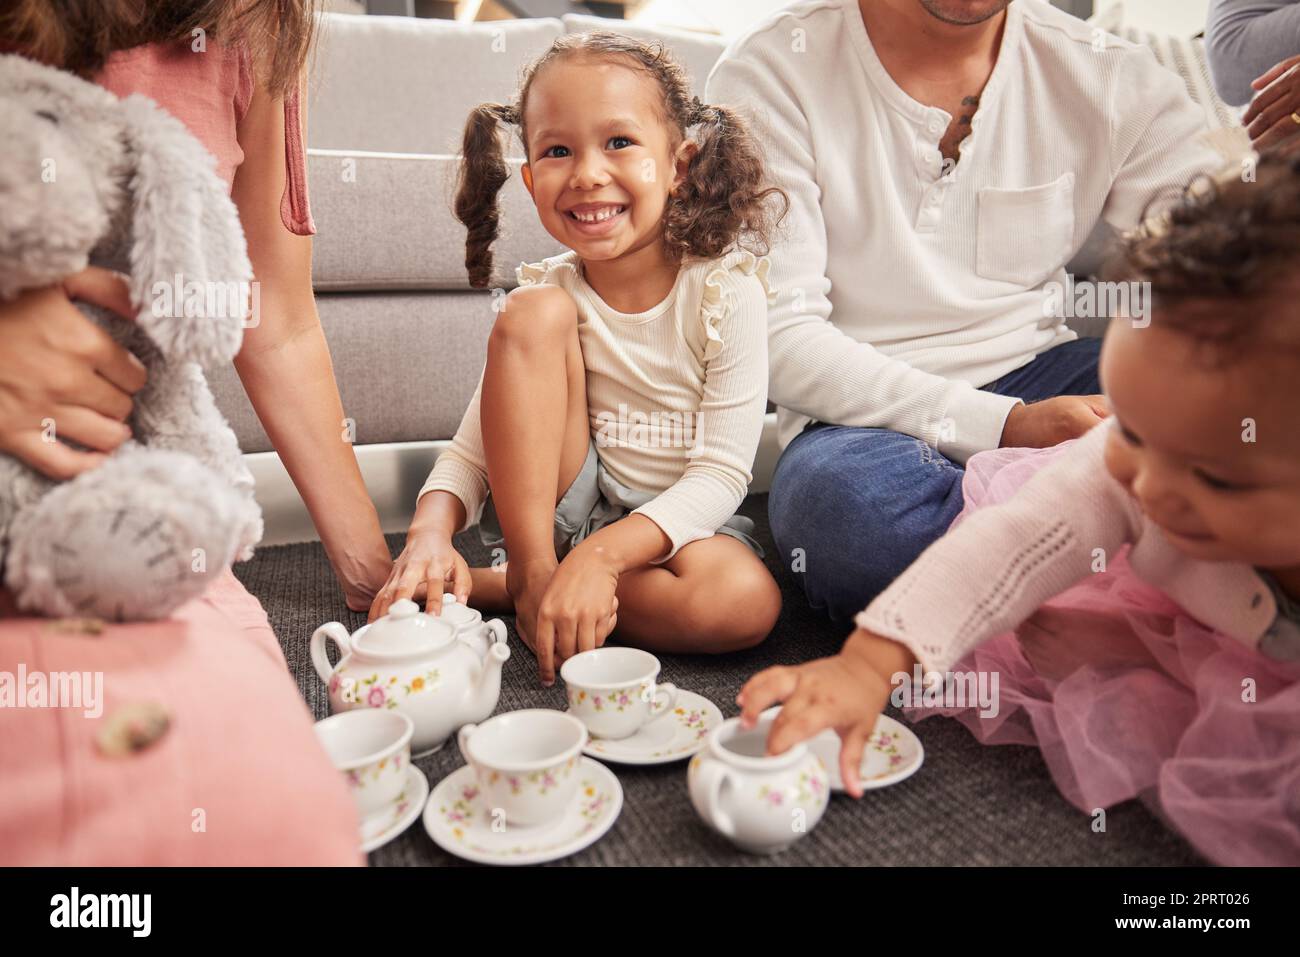 Happy, kids and children at play date have tea party, fun and playing together on home living room floor. Development, youth and group of little girl friends imagine theyre a princess at royal party Stock Photo